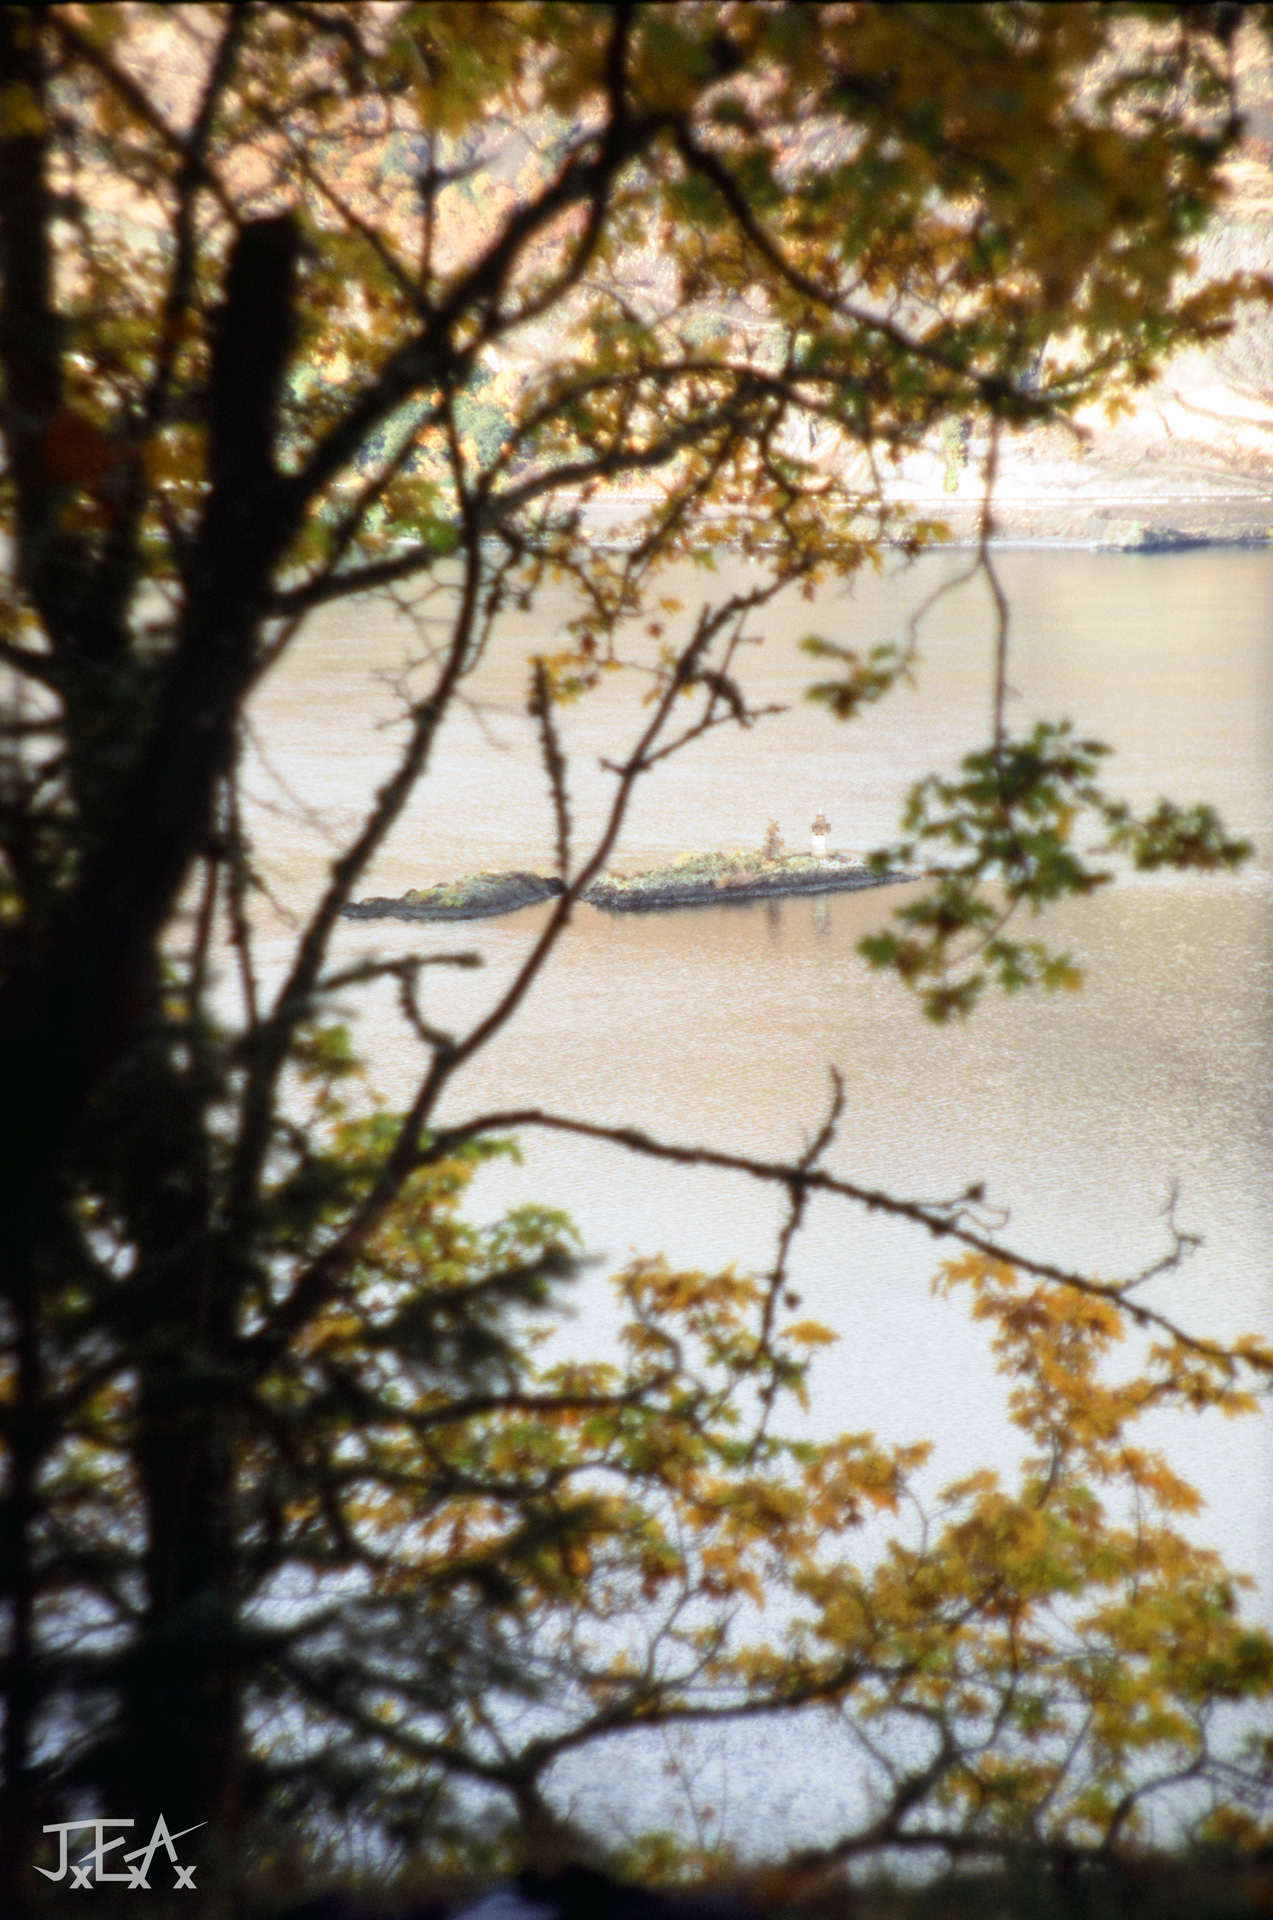 A shot of a little lighthouse on the columbia River through autumn leaves.